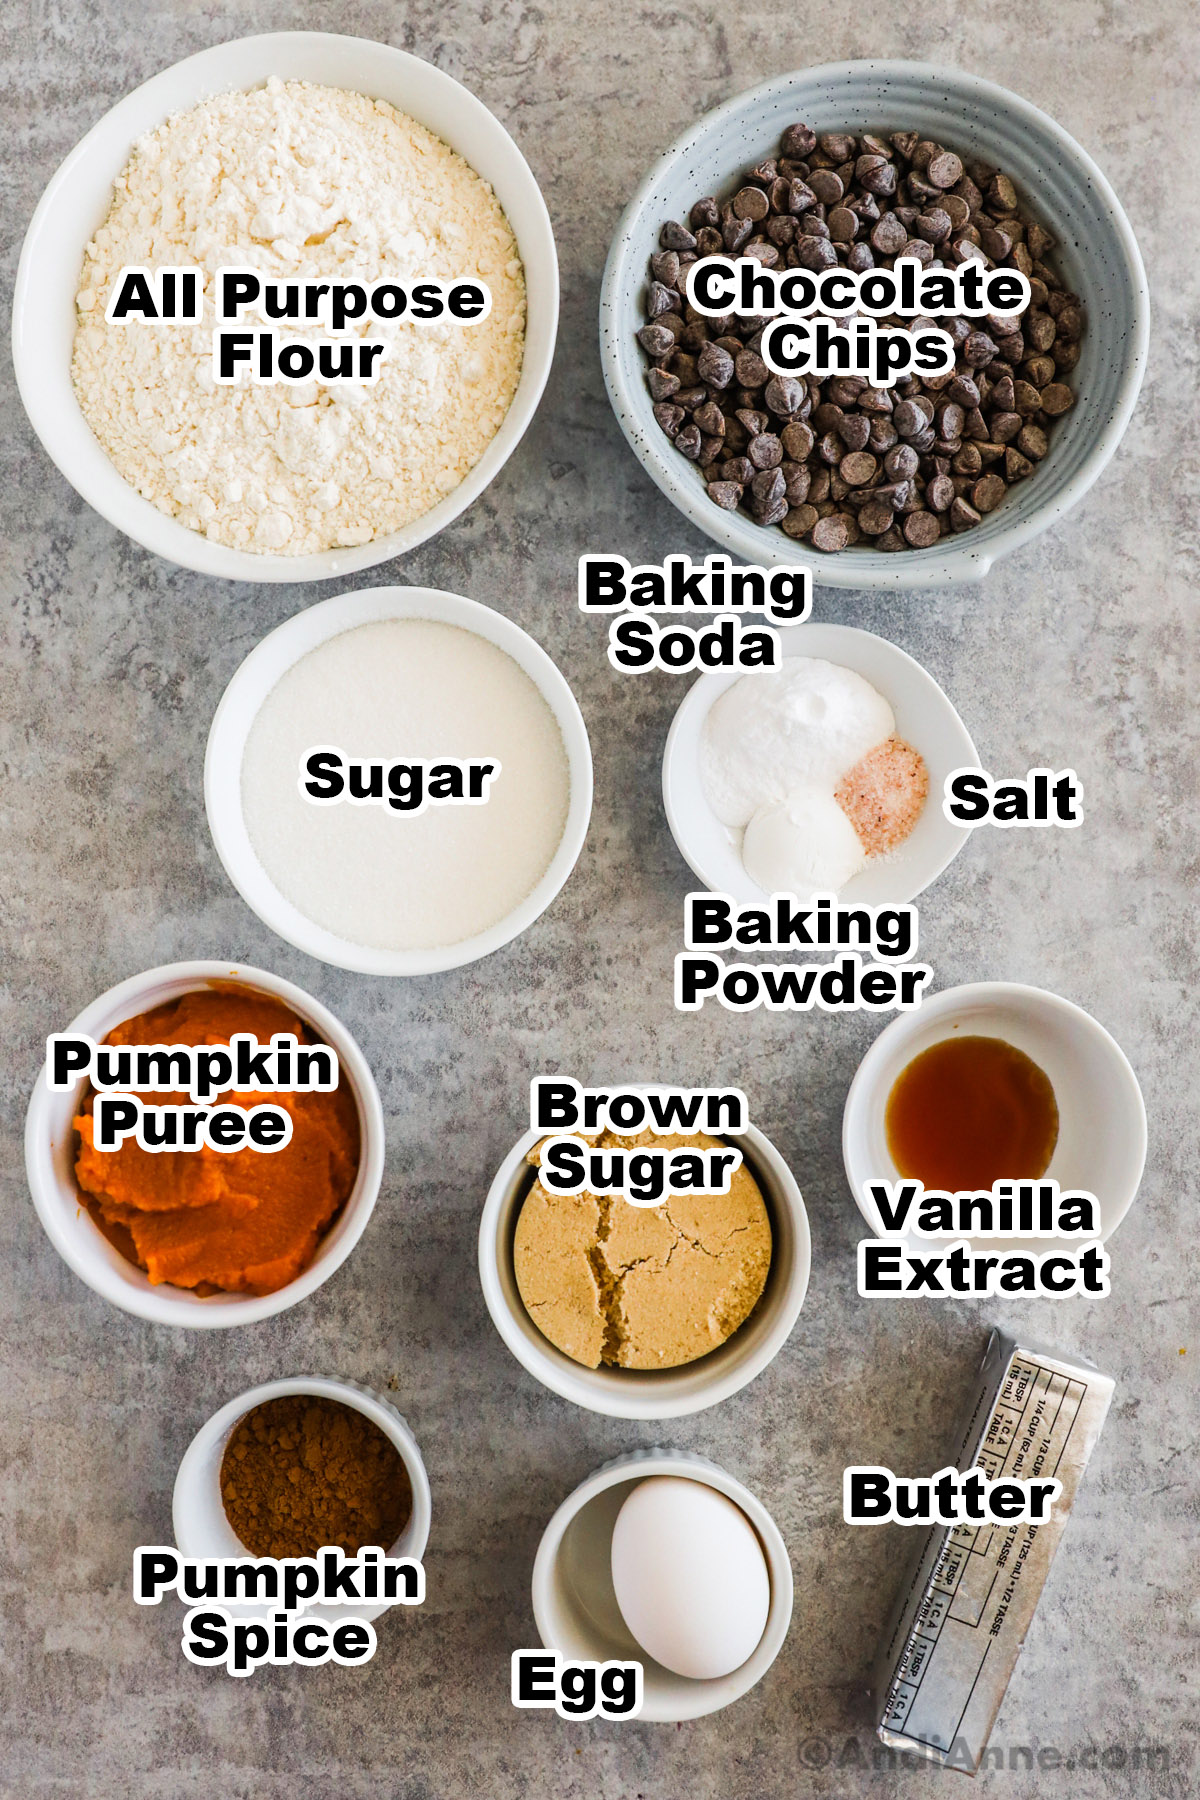 Bowls of recipe ingredients including flour, chocolate chips, white sugar, brown sugar, vanilla extract, pumpkin puree, pumpkin pie spice, egg and butter.